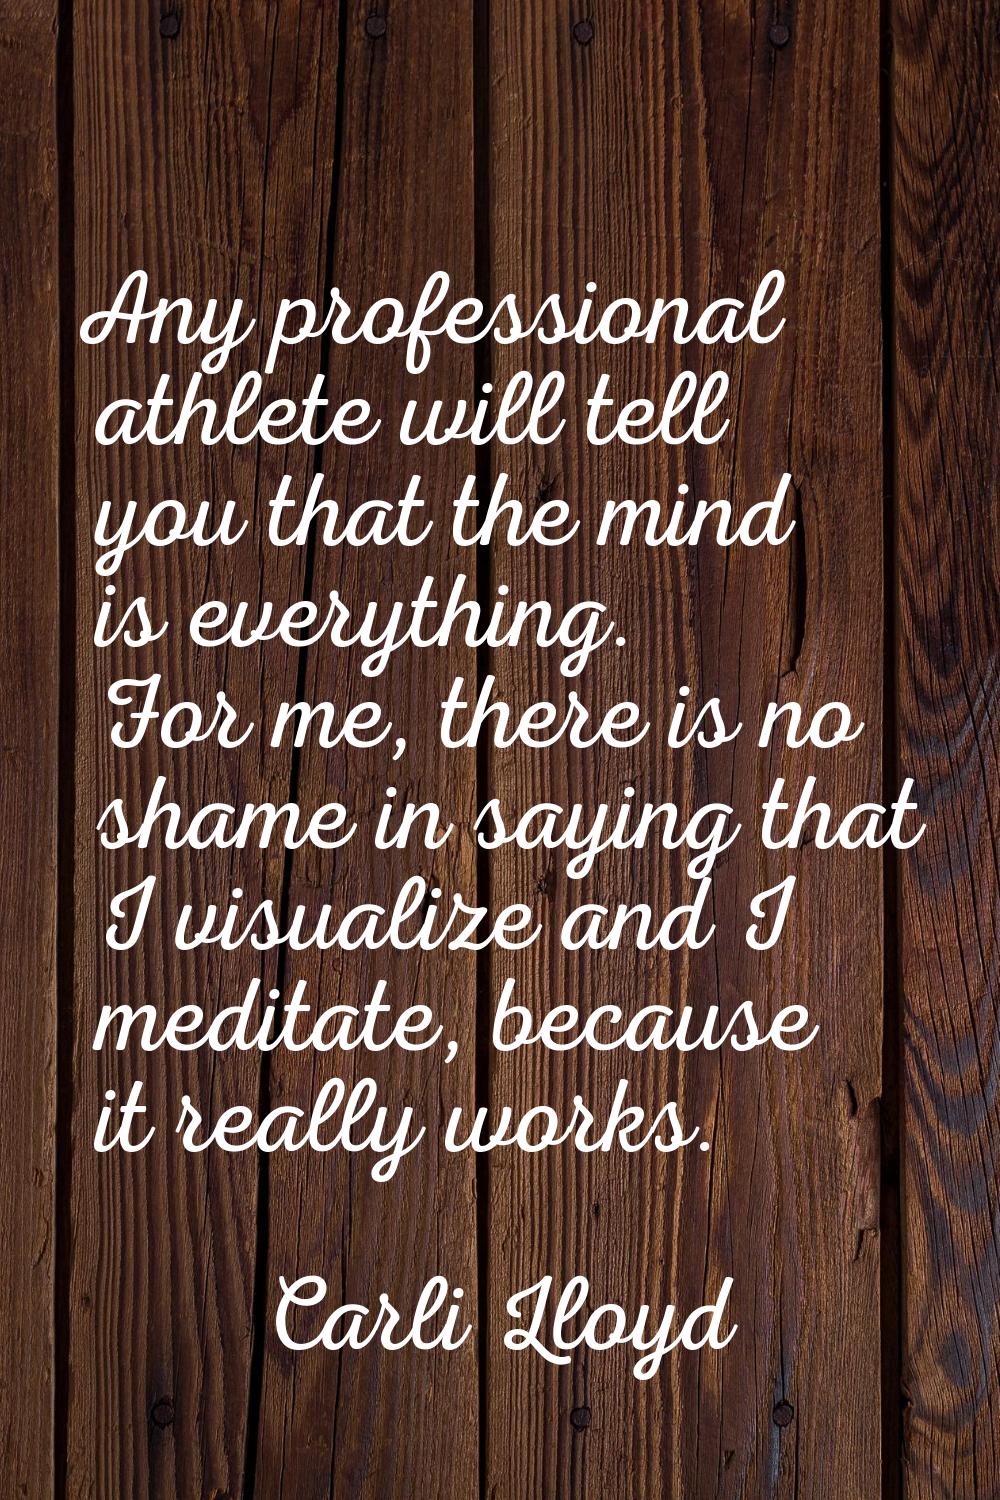 Any professional athlete will tell you that the mind is everything. For me, there is no shame in sa